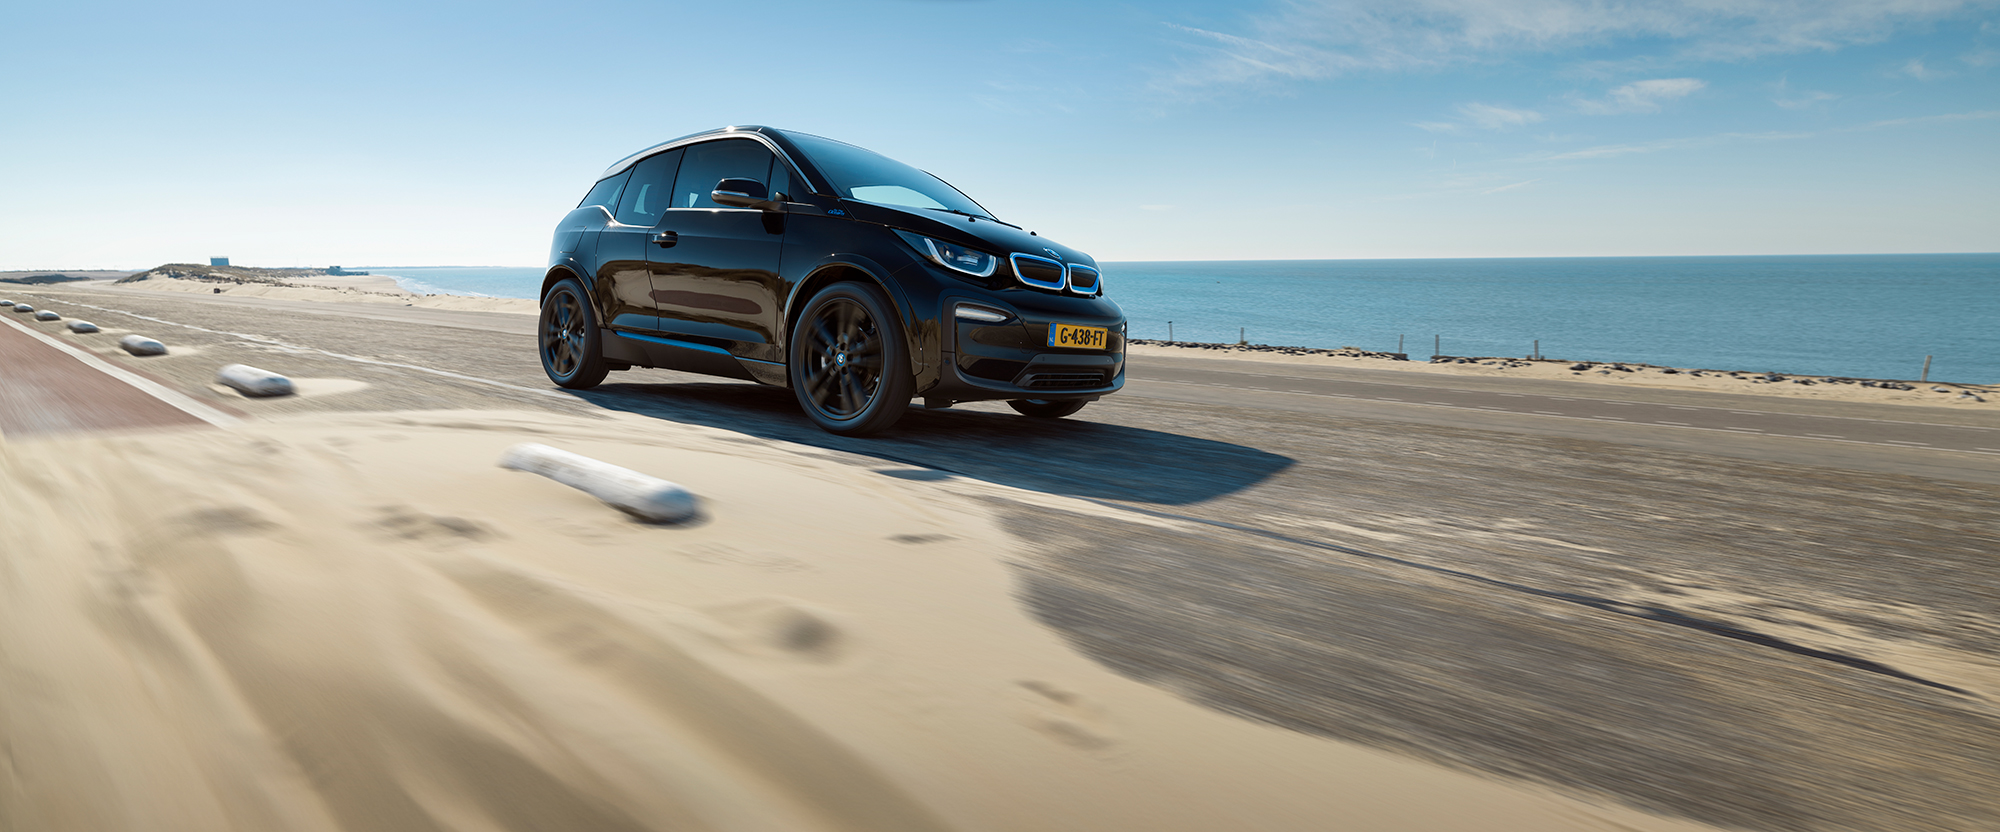 gijs spierings 2020 bmw i3 for the oceans 4